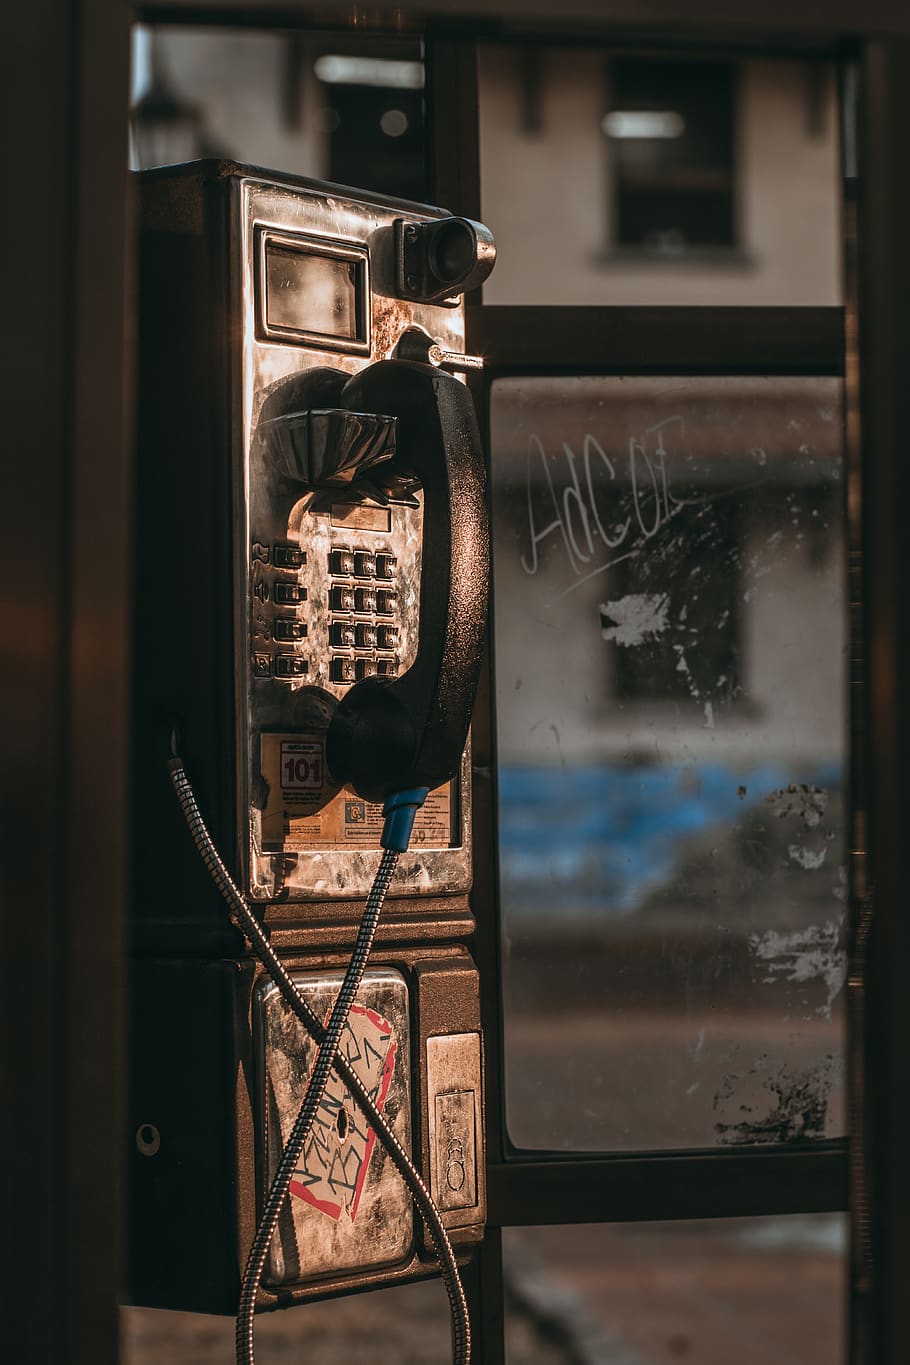 HD wallpaper: phone inside booth, communication, technology, telephone  booth | Wallpaper Flare